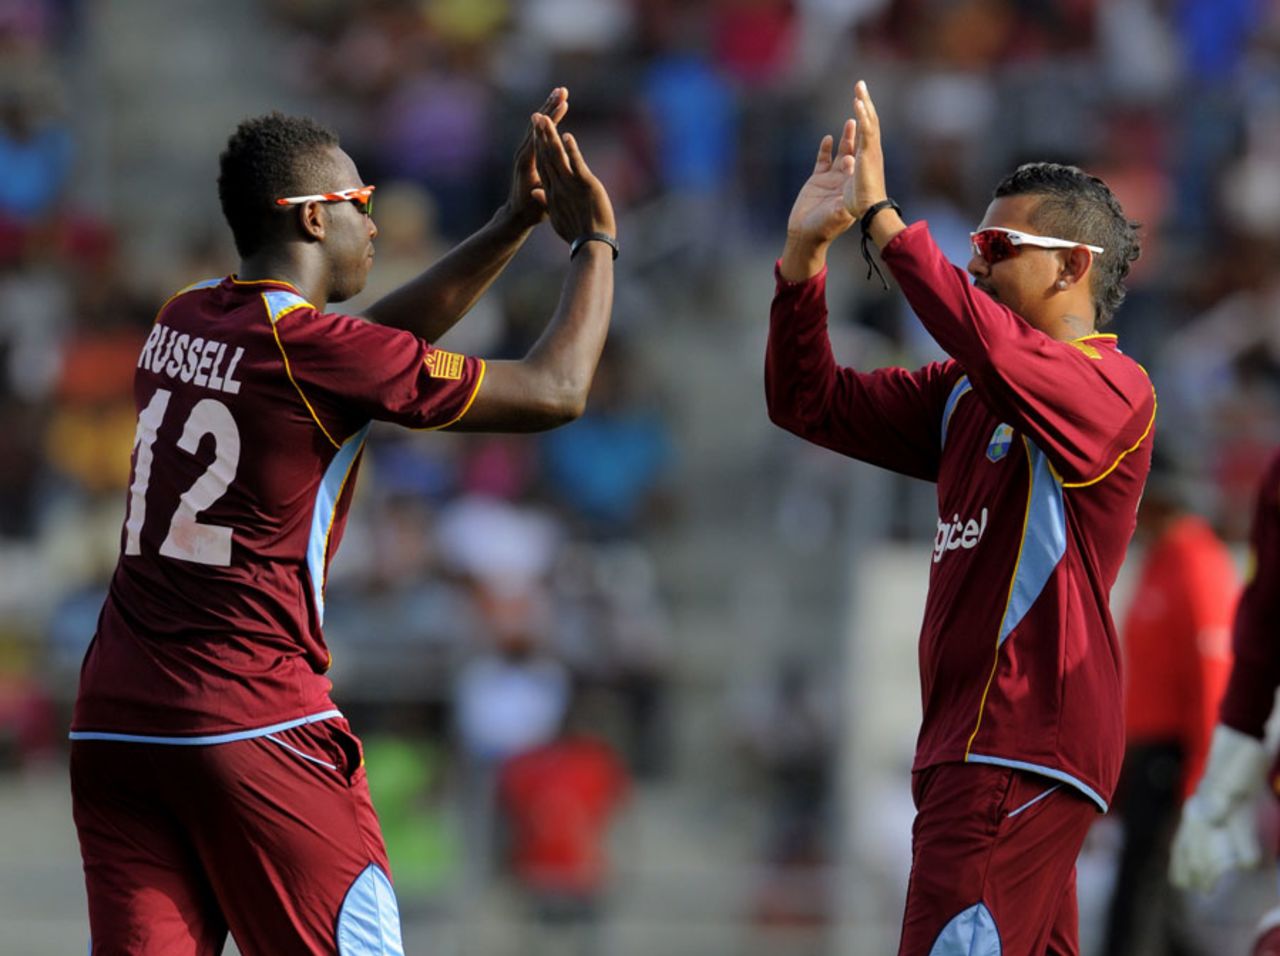 Sunil Narine had returns of 2 for 19 in four overs, West Indies v New Zealand, 2nd T20I, Dominica, July 6, 2014